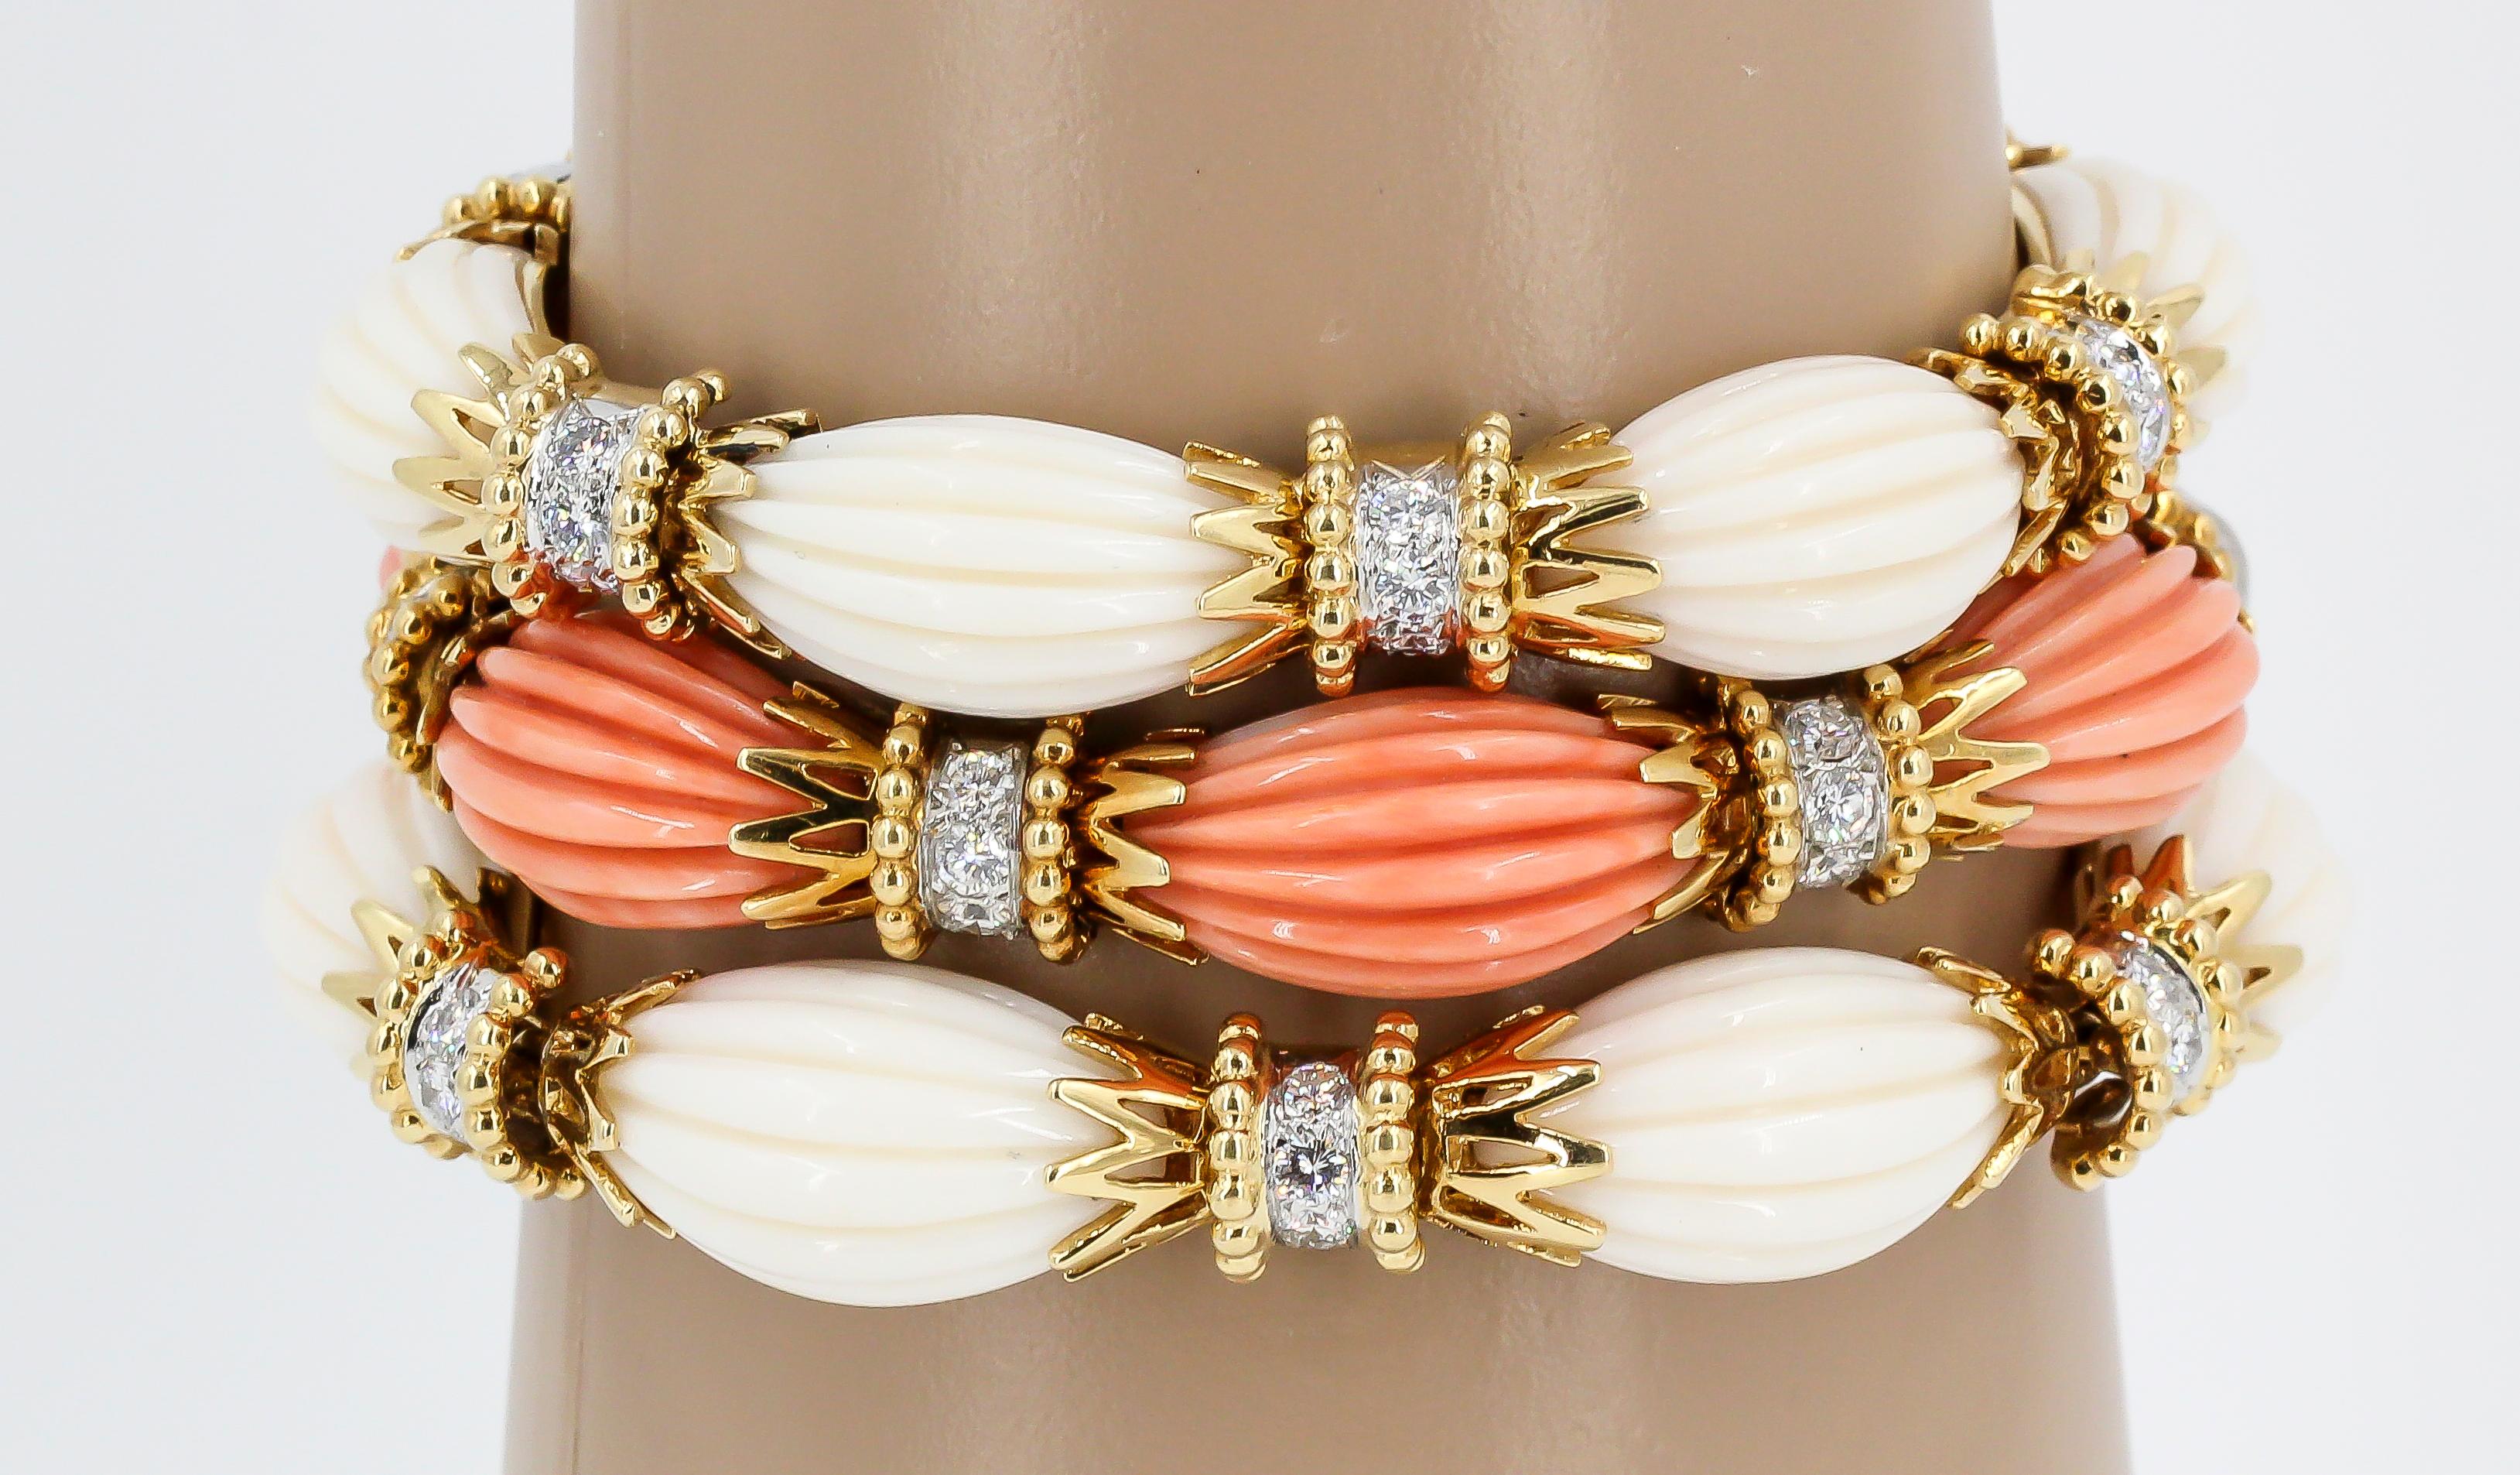 Impressive trio of diamond and coral bracelets set in 18K gold & platinum, by Van Cleef & Arpels, circa 1960s-70s. Very rare to find one in good condition, let alone three.  The white and salmon pink coral compliment eachother wonderfully. They